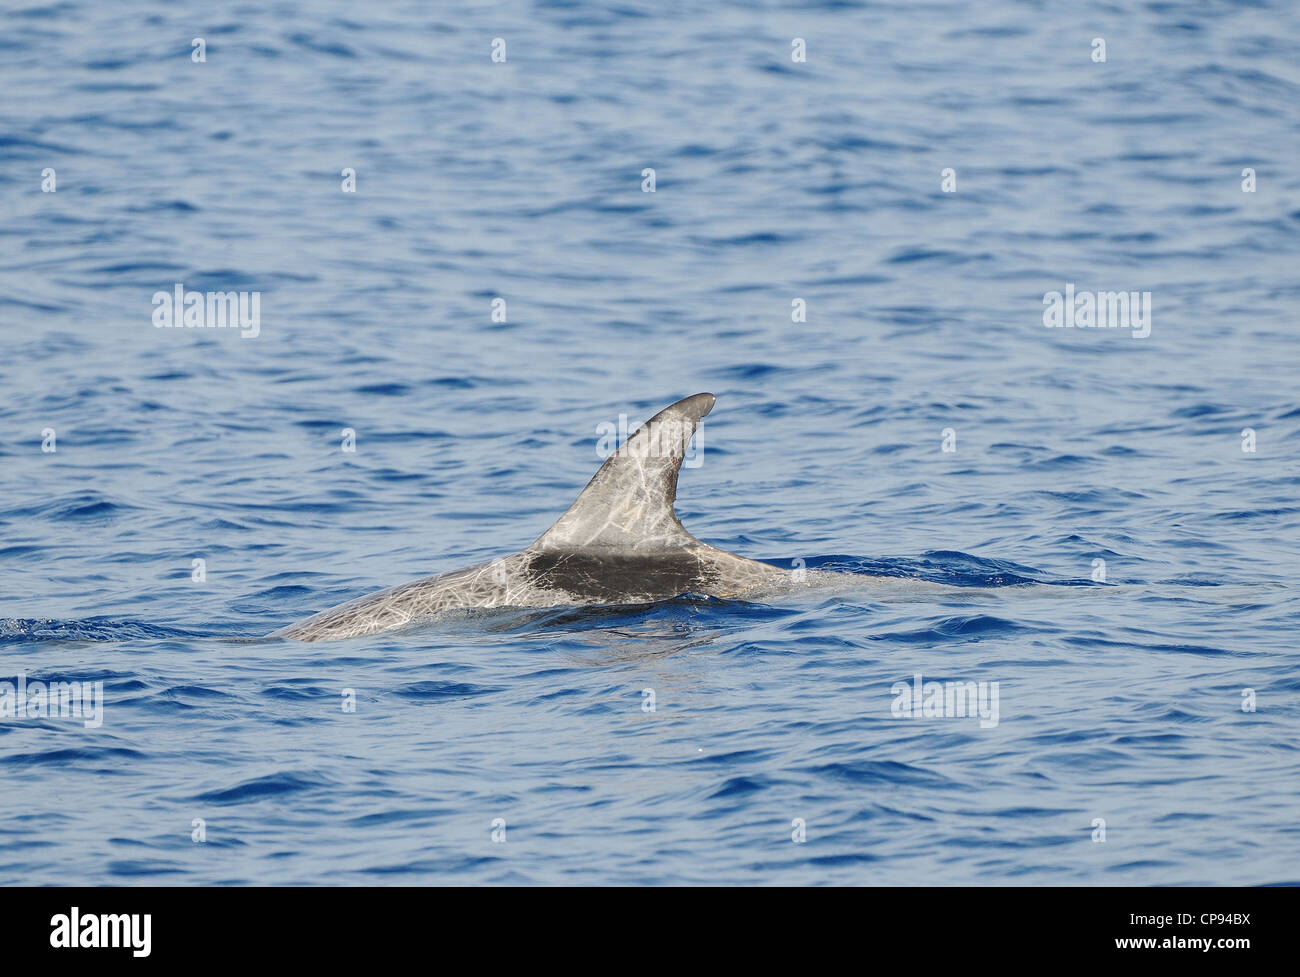 Risso's Dolphin (Grampus griseus) dorsal fin and back of well-scarred individual, The Maldives Stock Photo